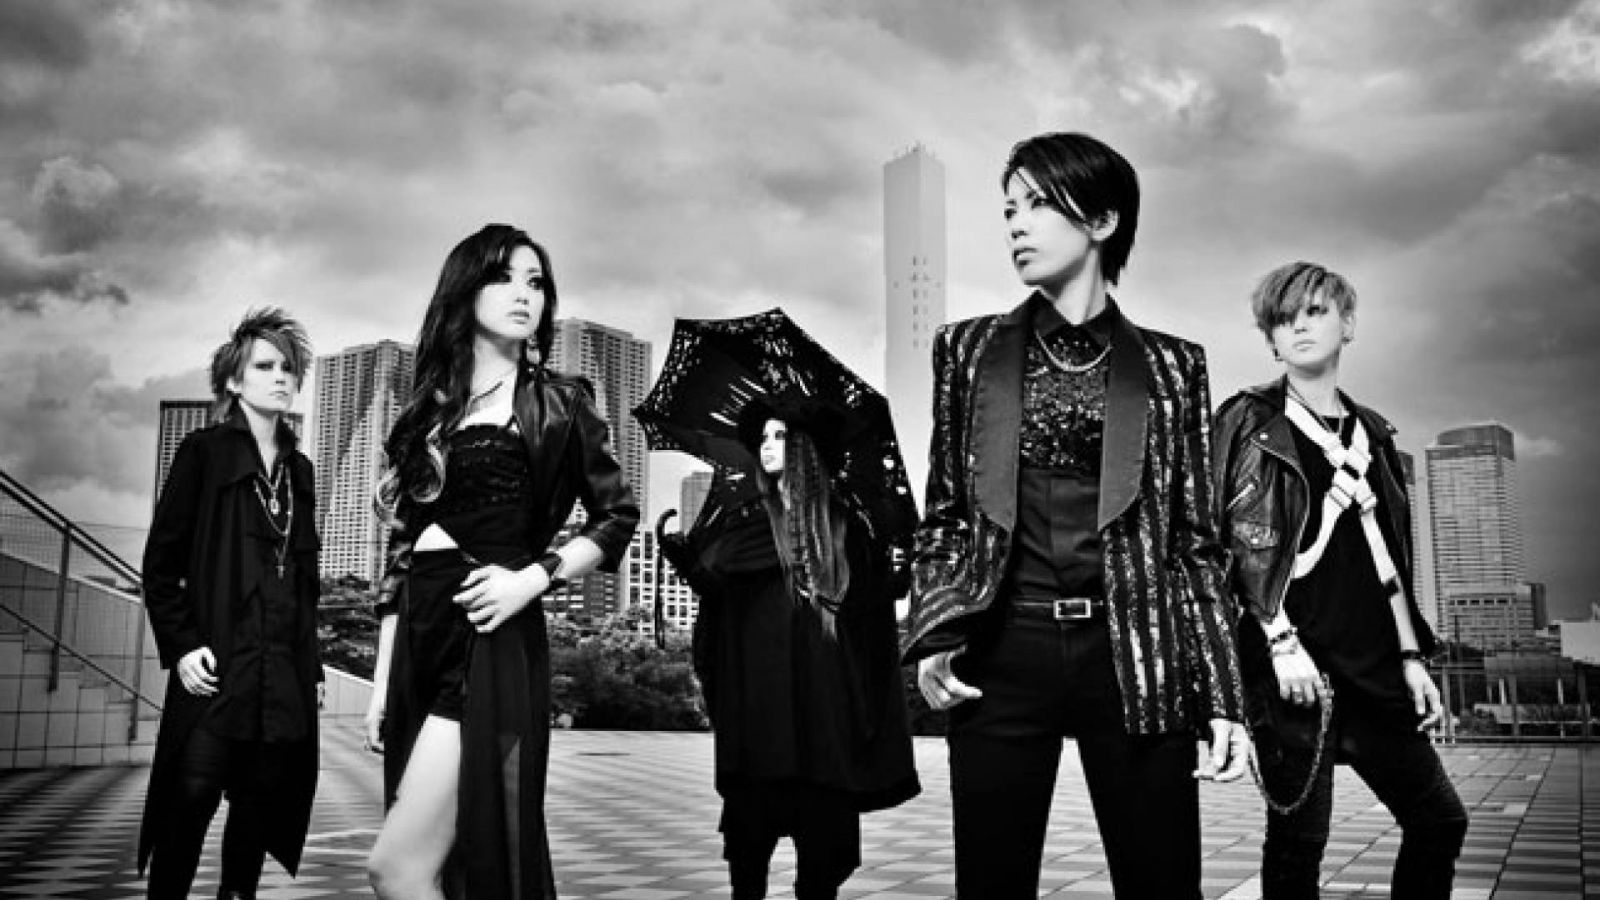 exist†trace to Broadcast Live Concert Worldwide on July 28th © Monster's Inc. All rights reserved.